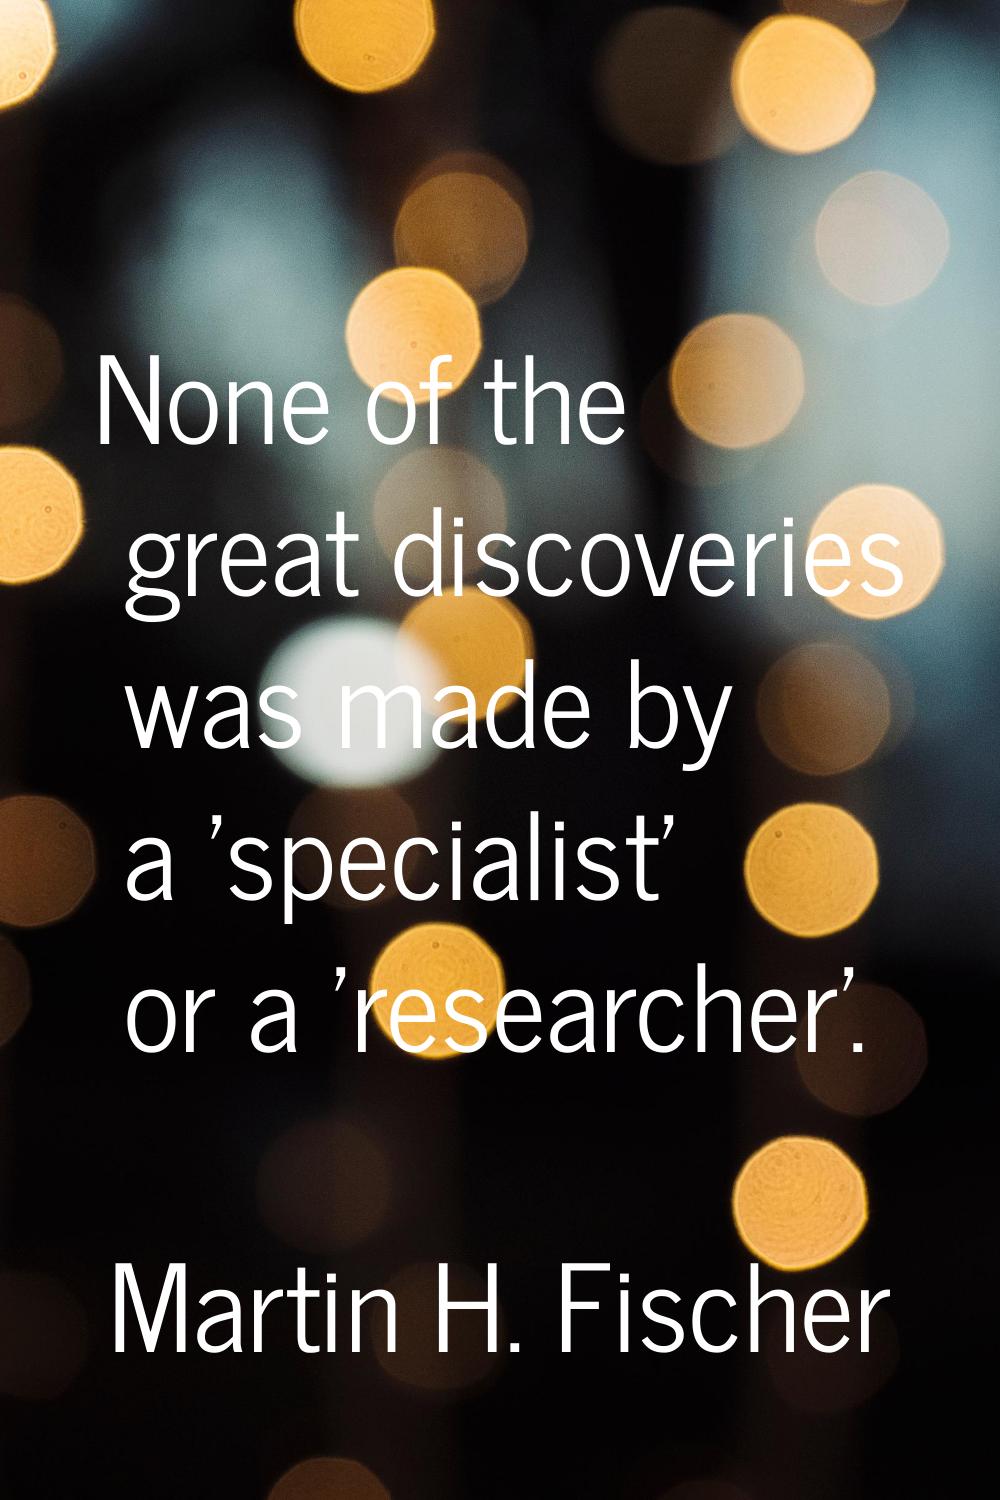 None of the great discoveries was made by a 'specialist' or a 'researcher'.